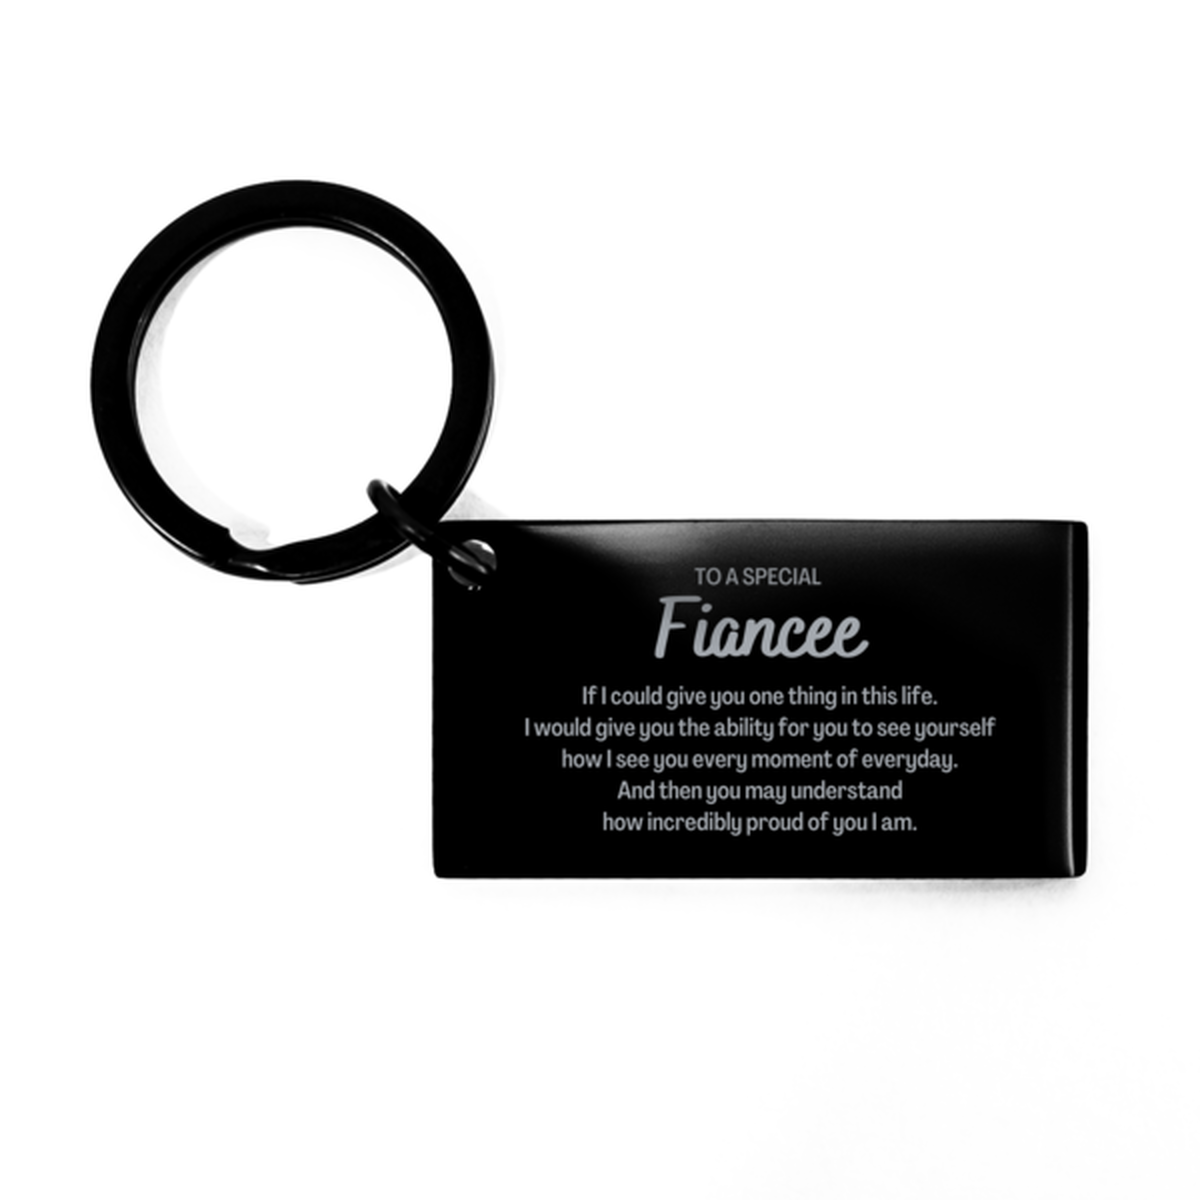 To My Fiancee Keychain, Gifts For Fiancee Engraved, Inspirational Gifts for Christmas Birthday, Epic Gifts for Fiancee To A Special Fiancee how incredibly proud of you I am